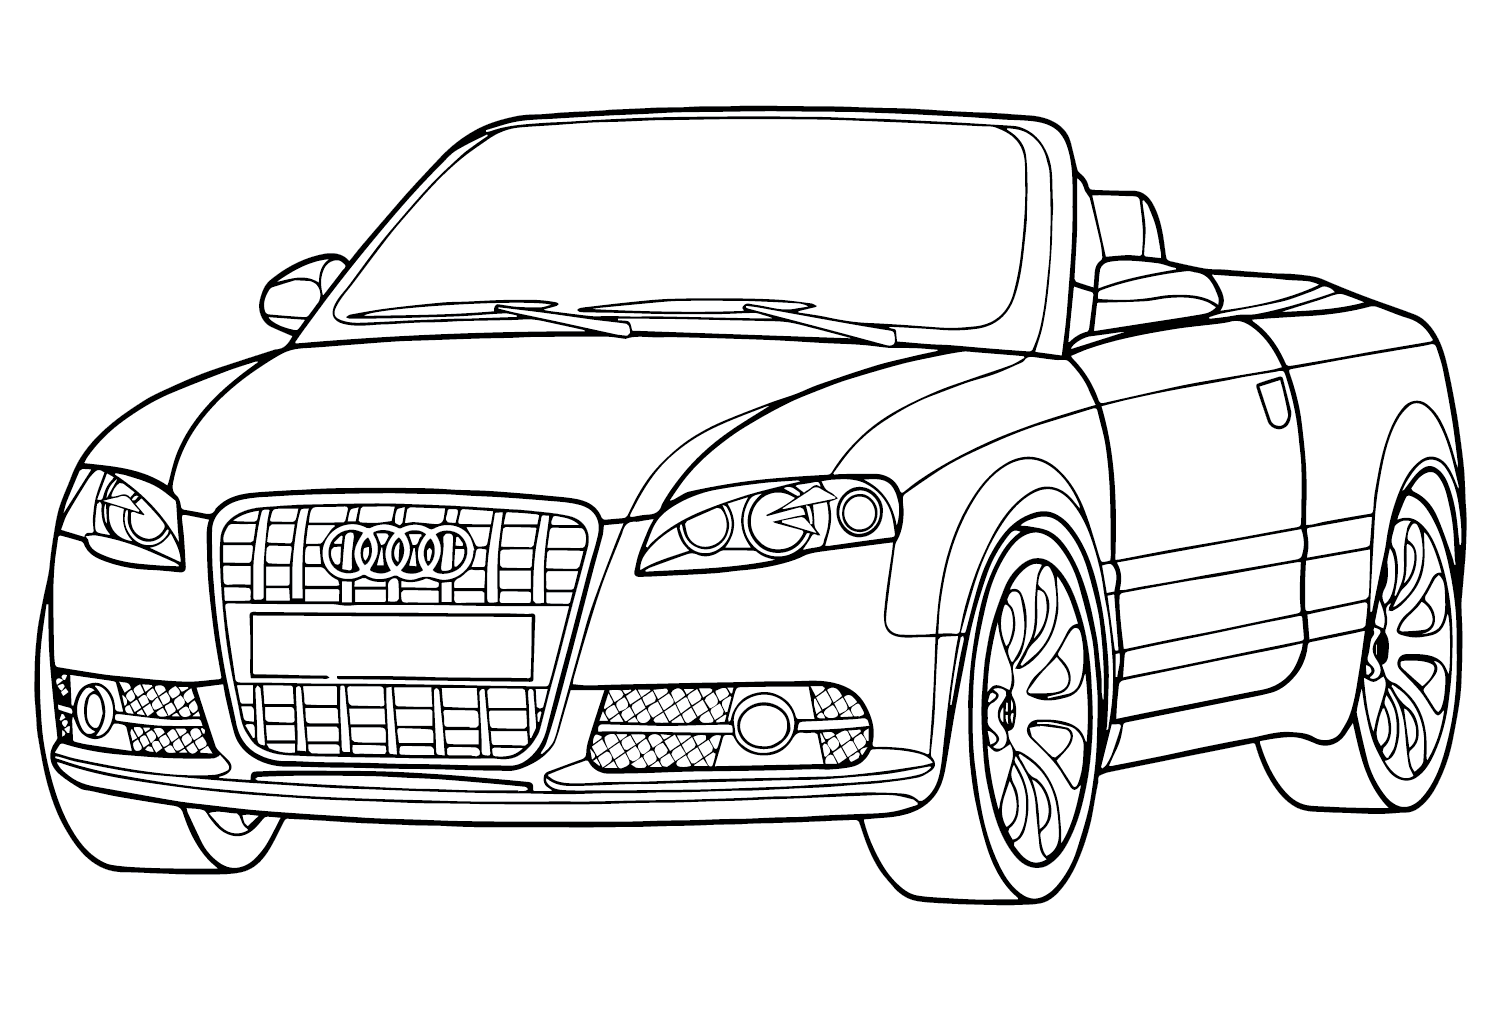 Audi S5 Cabriolet Coloring Page from Audi